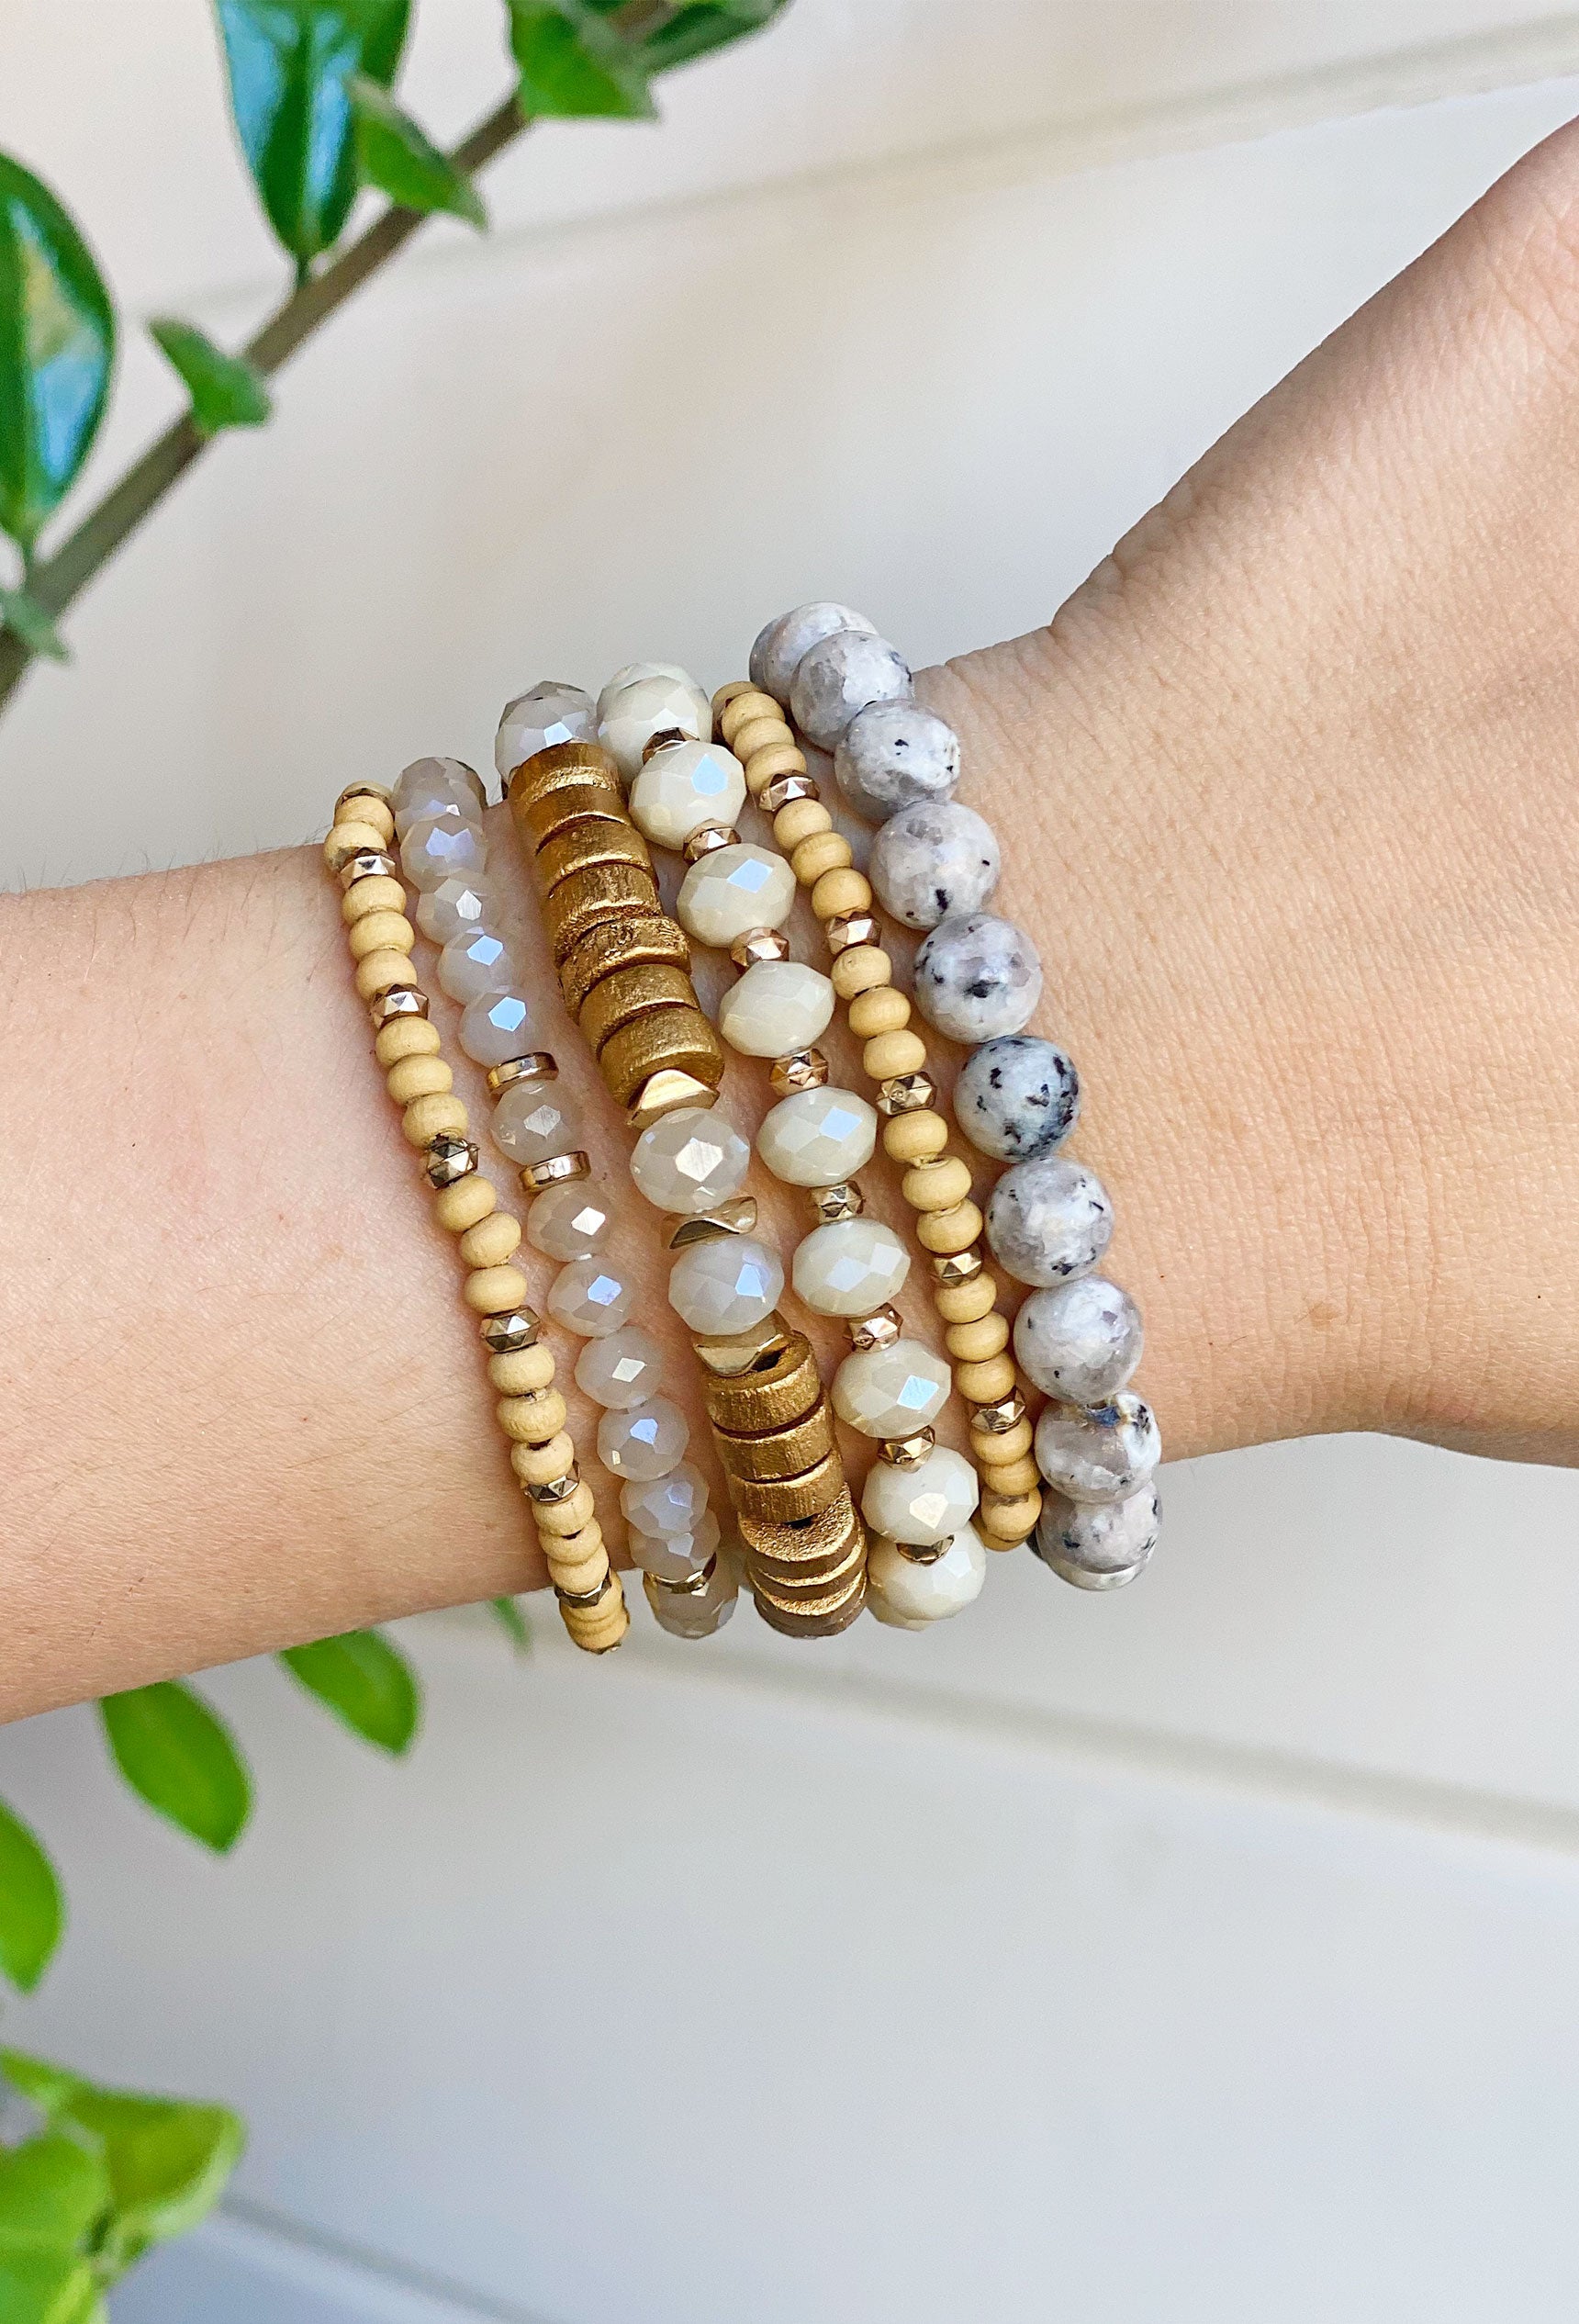 Zoey Bracelet Set in Neutral, set of 6, neutral colored beads mixed with gold